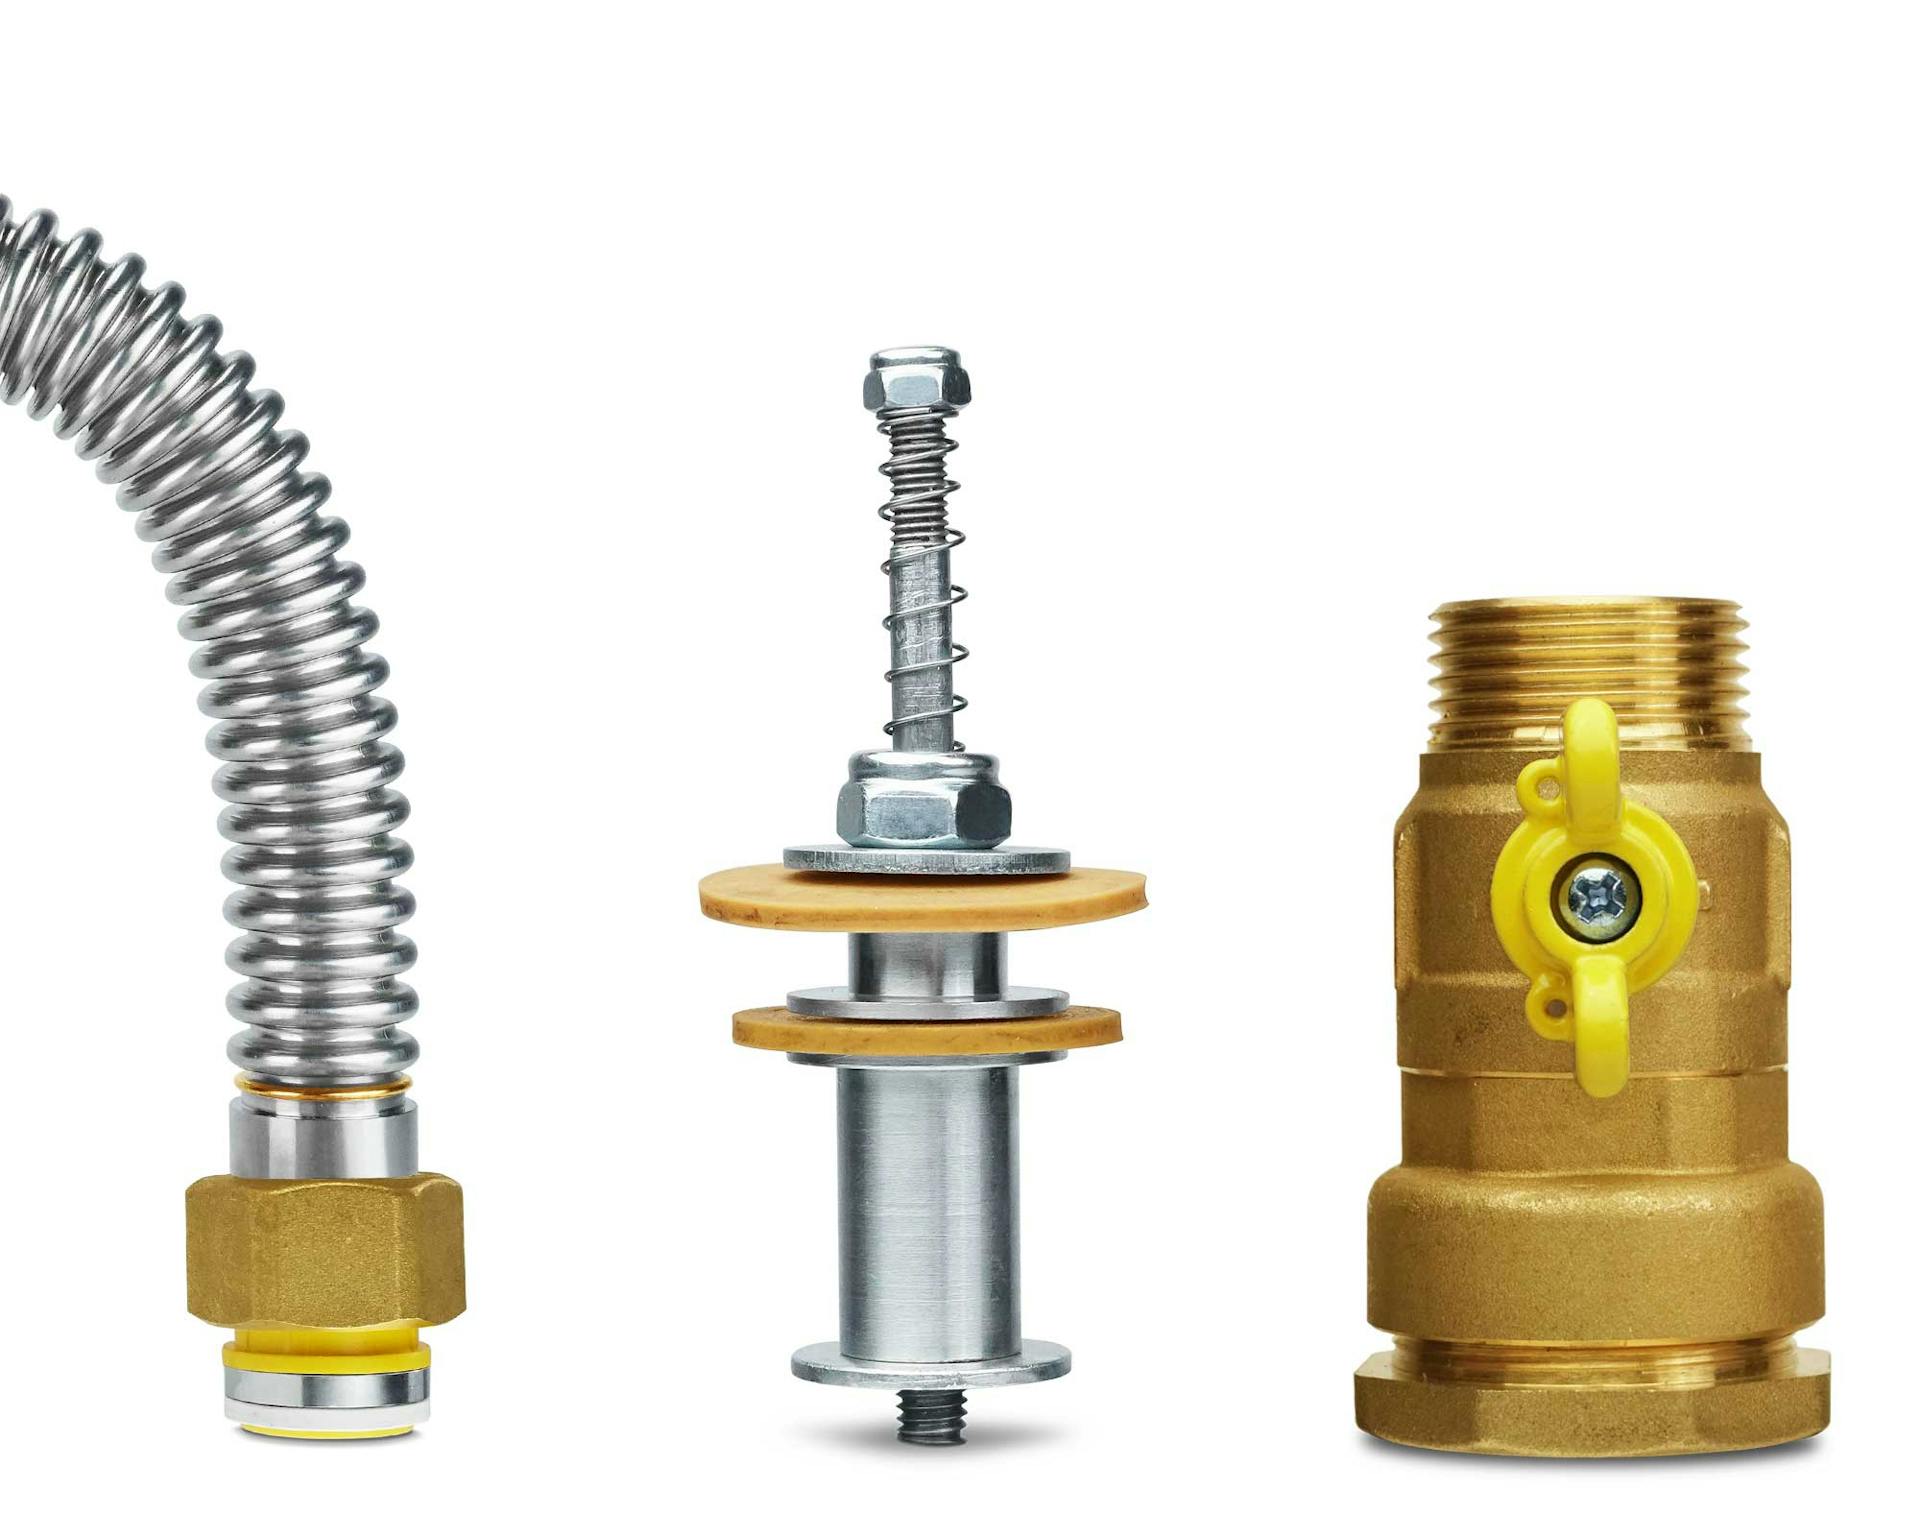 OCI - Metal hose, ball valve and other products